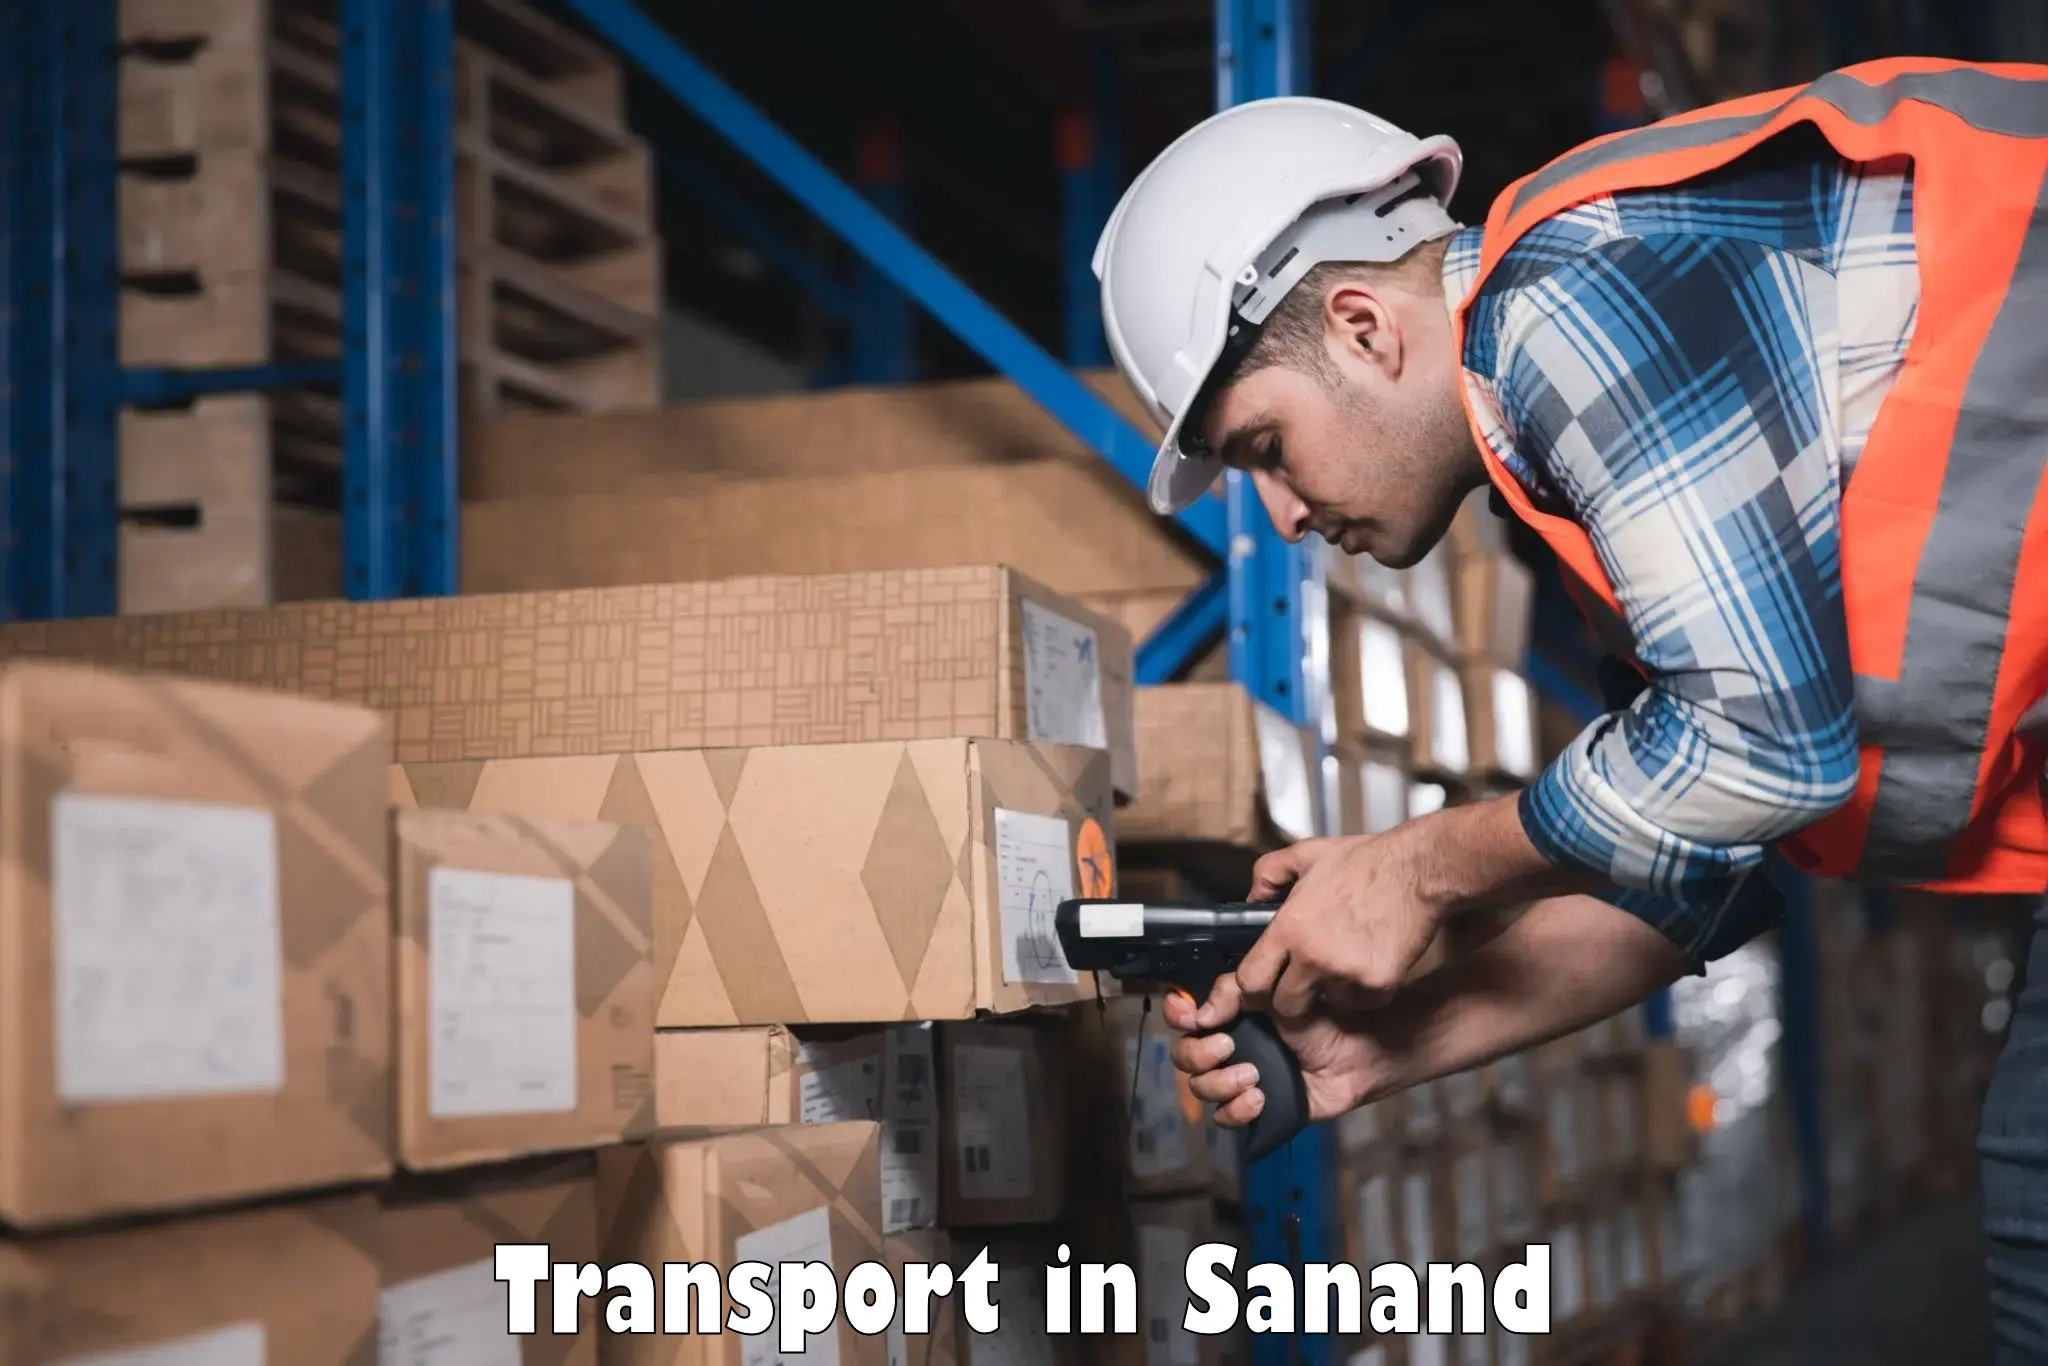 Vehicle transport services in Sanand